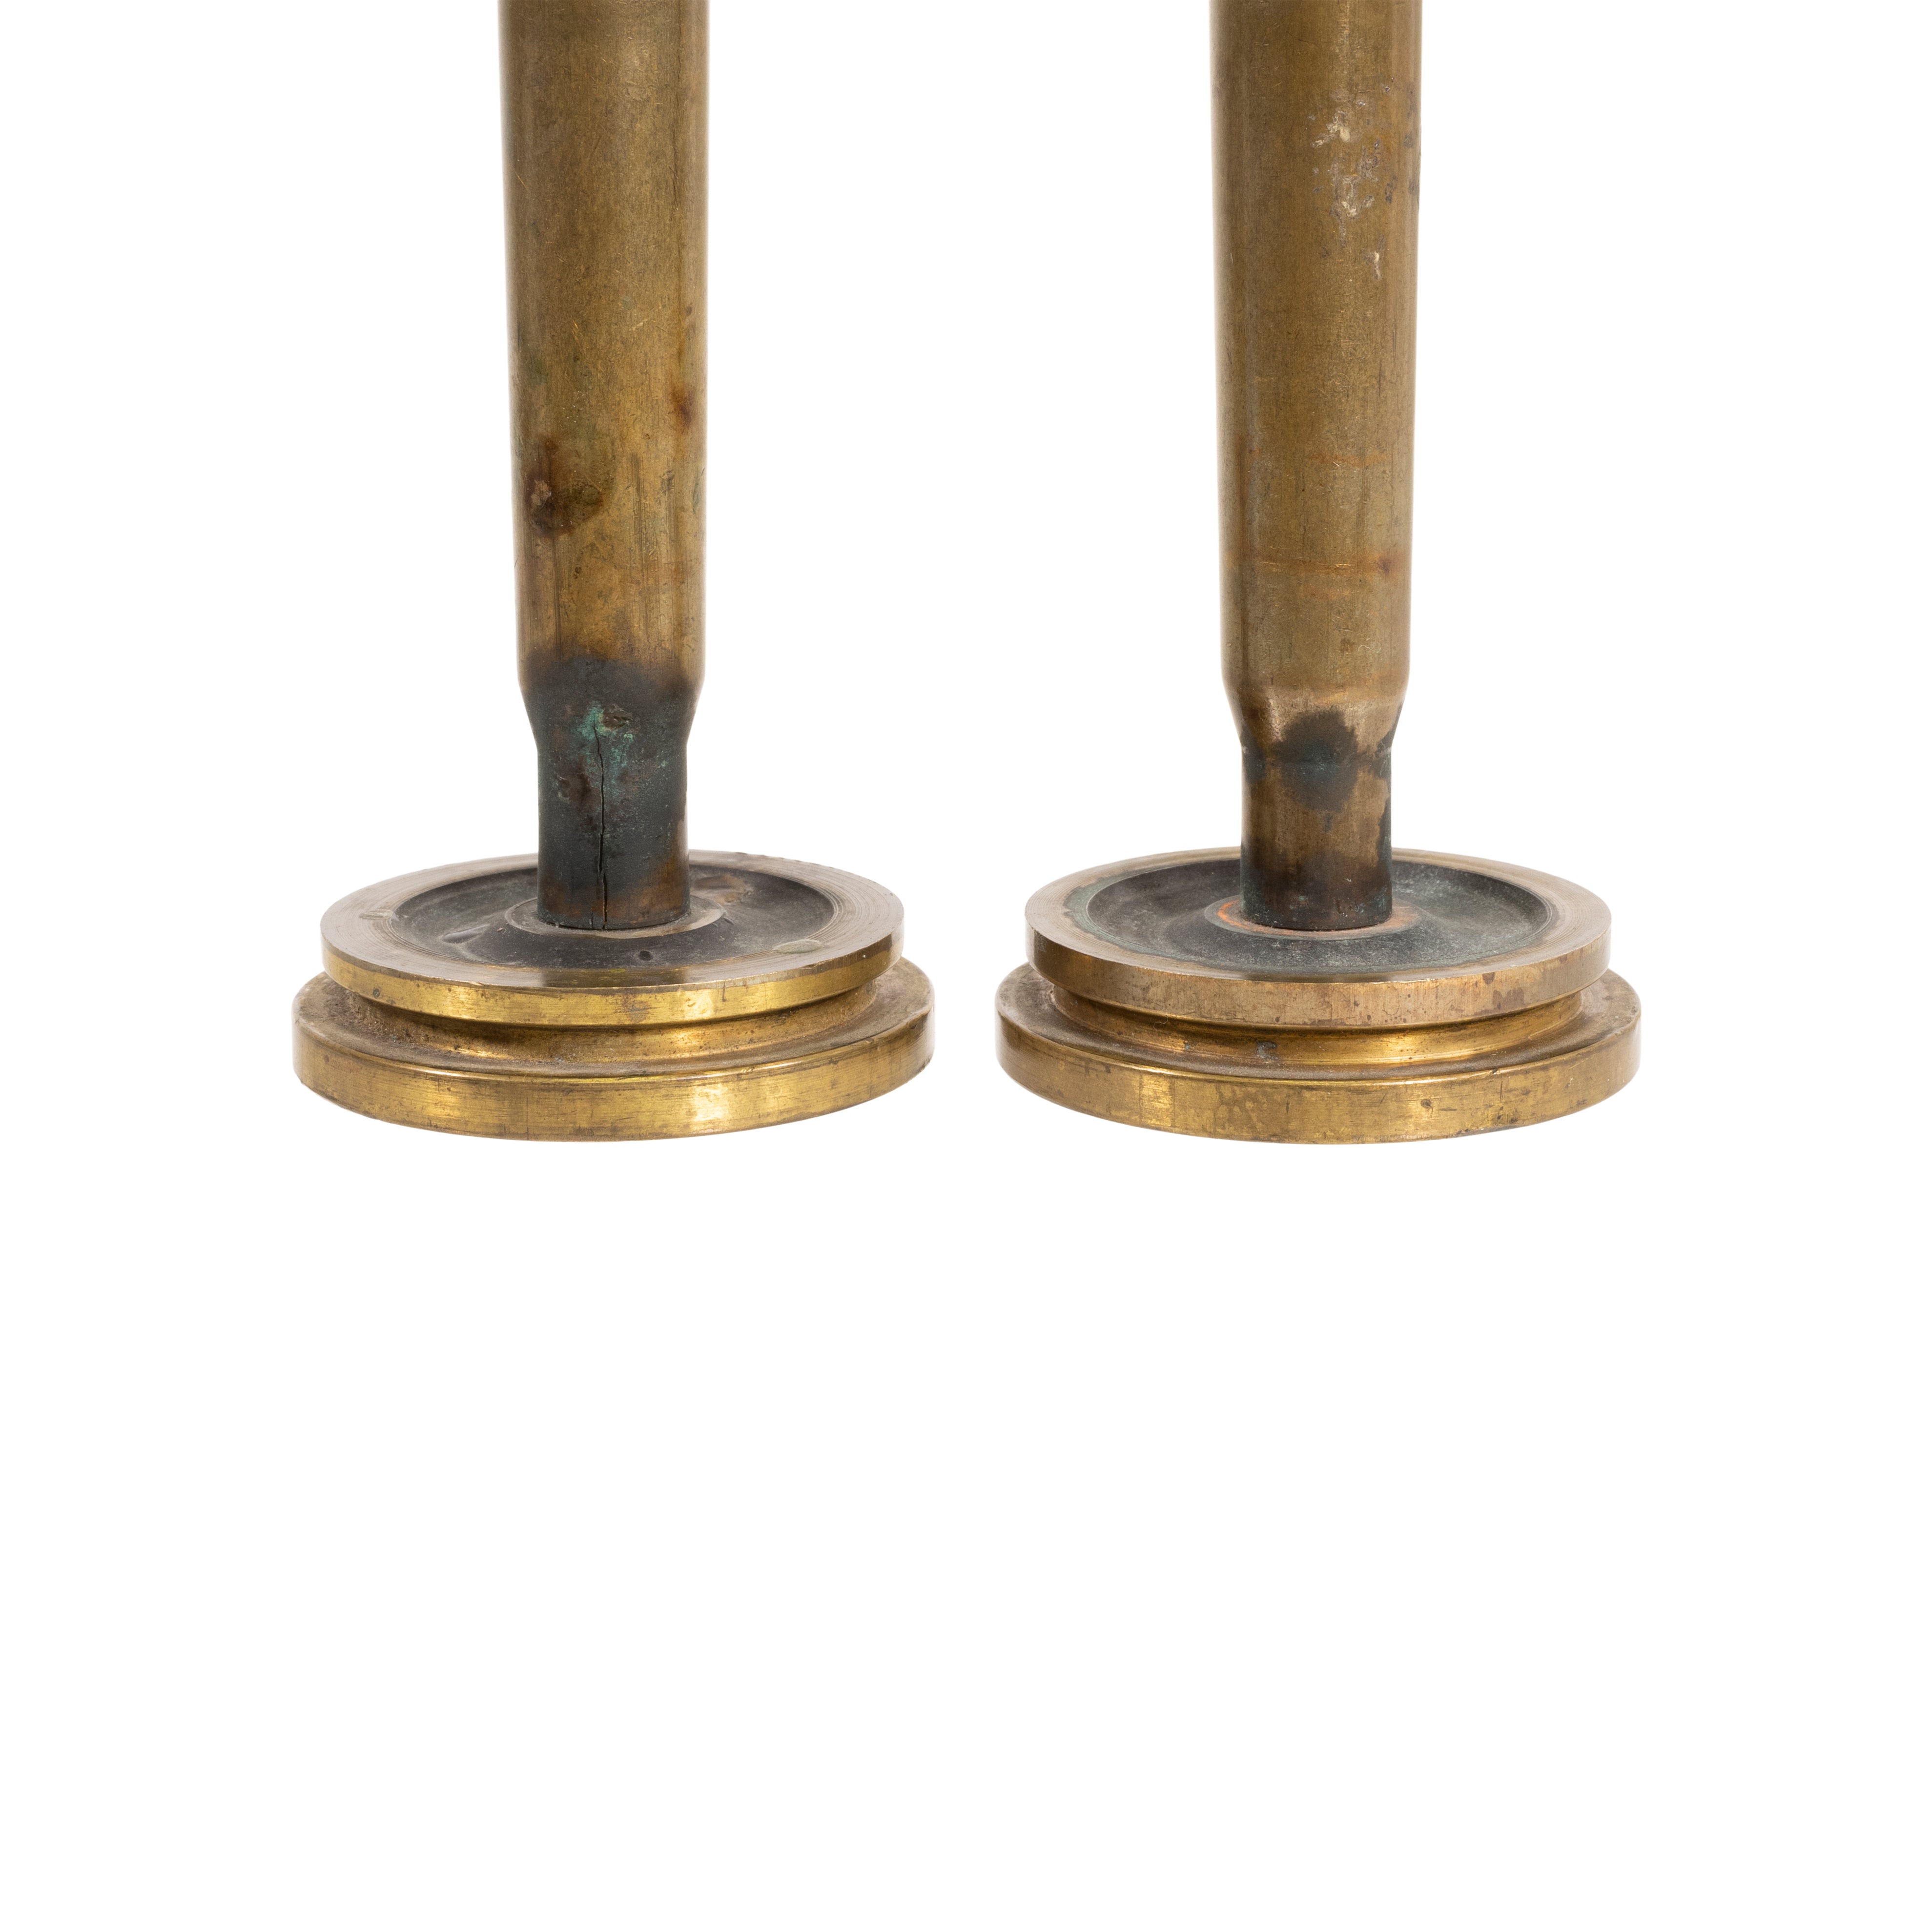 Pair Trench Art Candle Holders